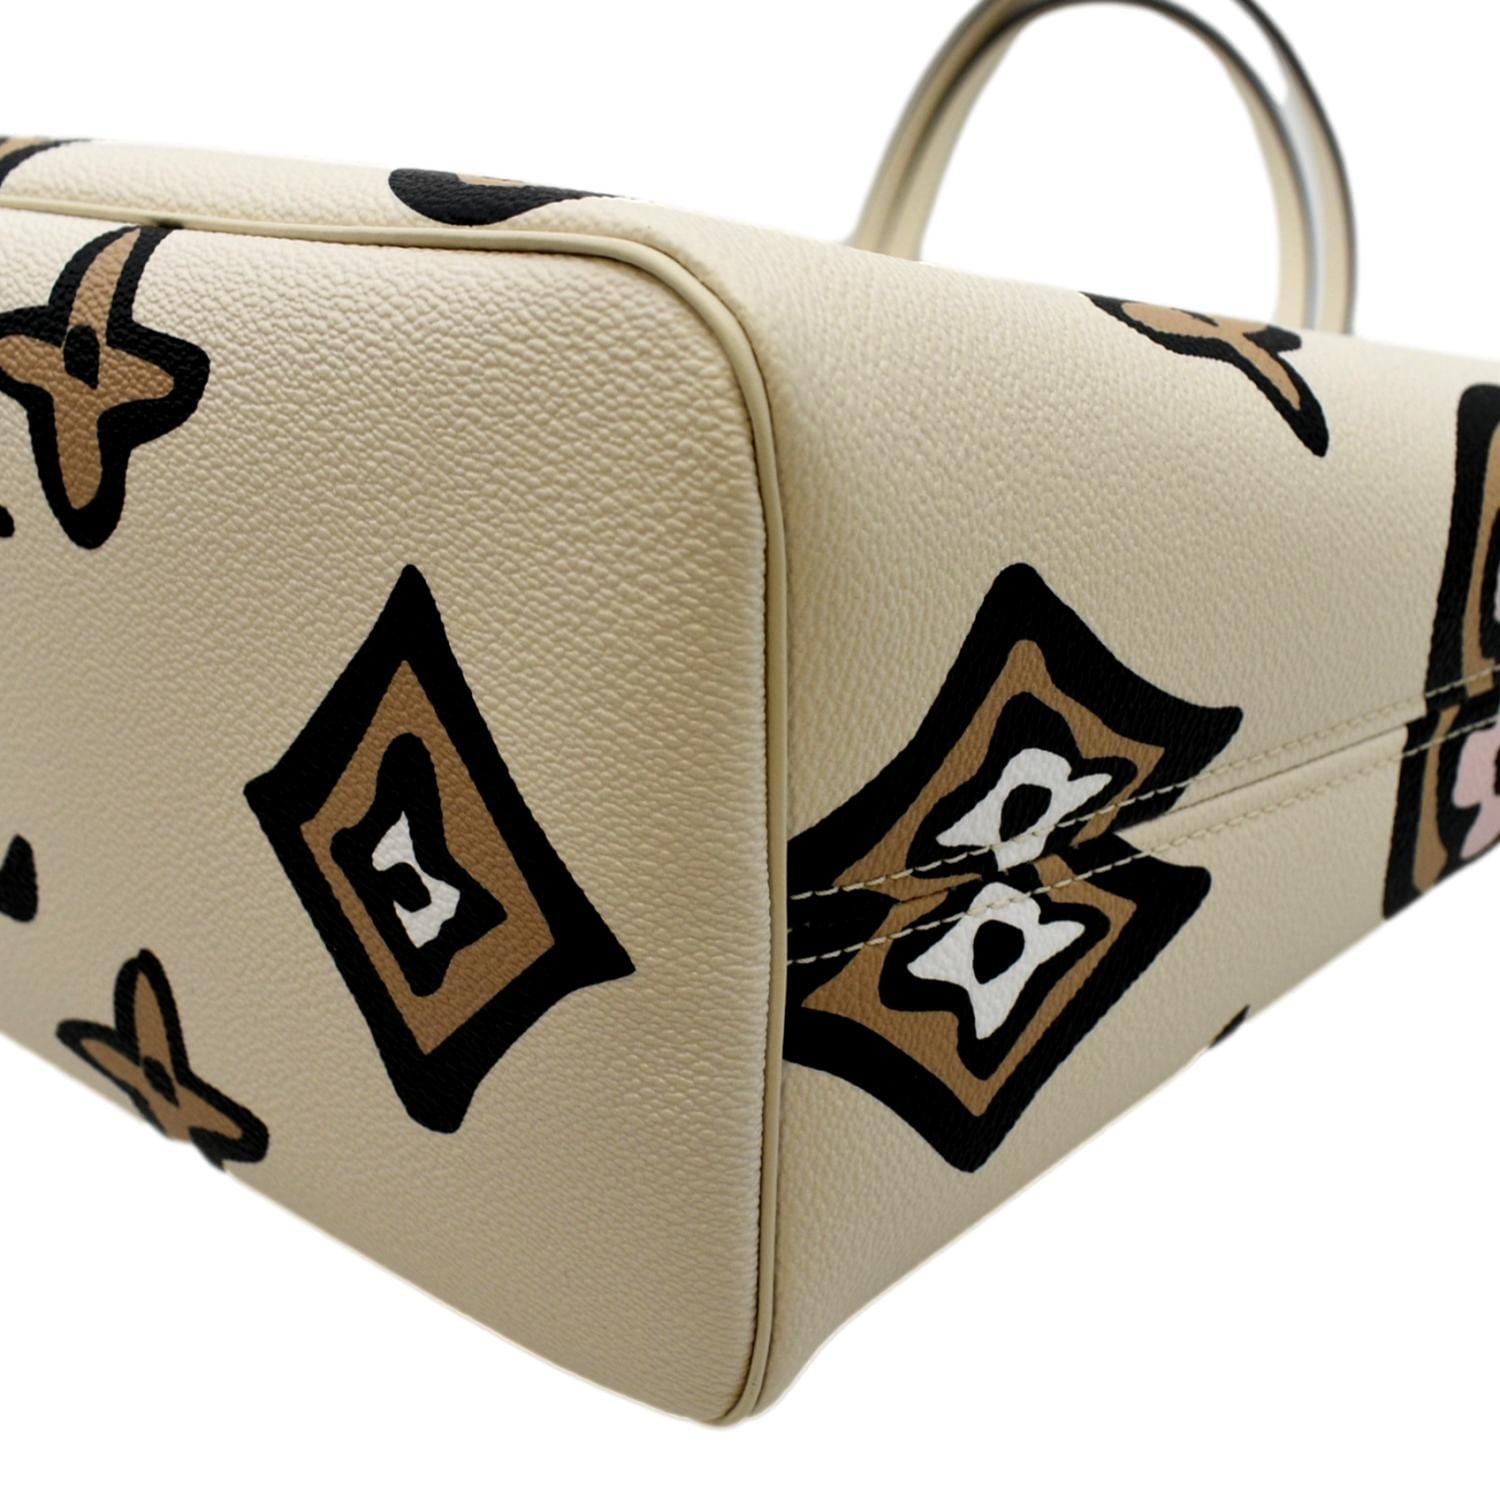 LOUIS VUITTON WILD AT HEART NEVERFULL MM CREME GIANT MONOGRAM BAG **No Pouch**